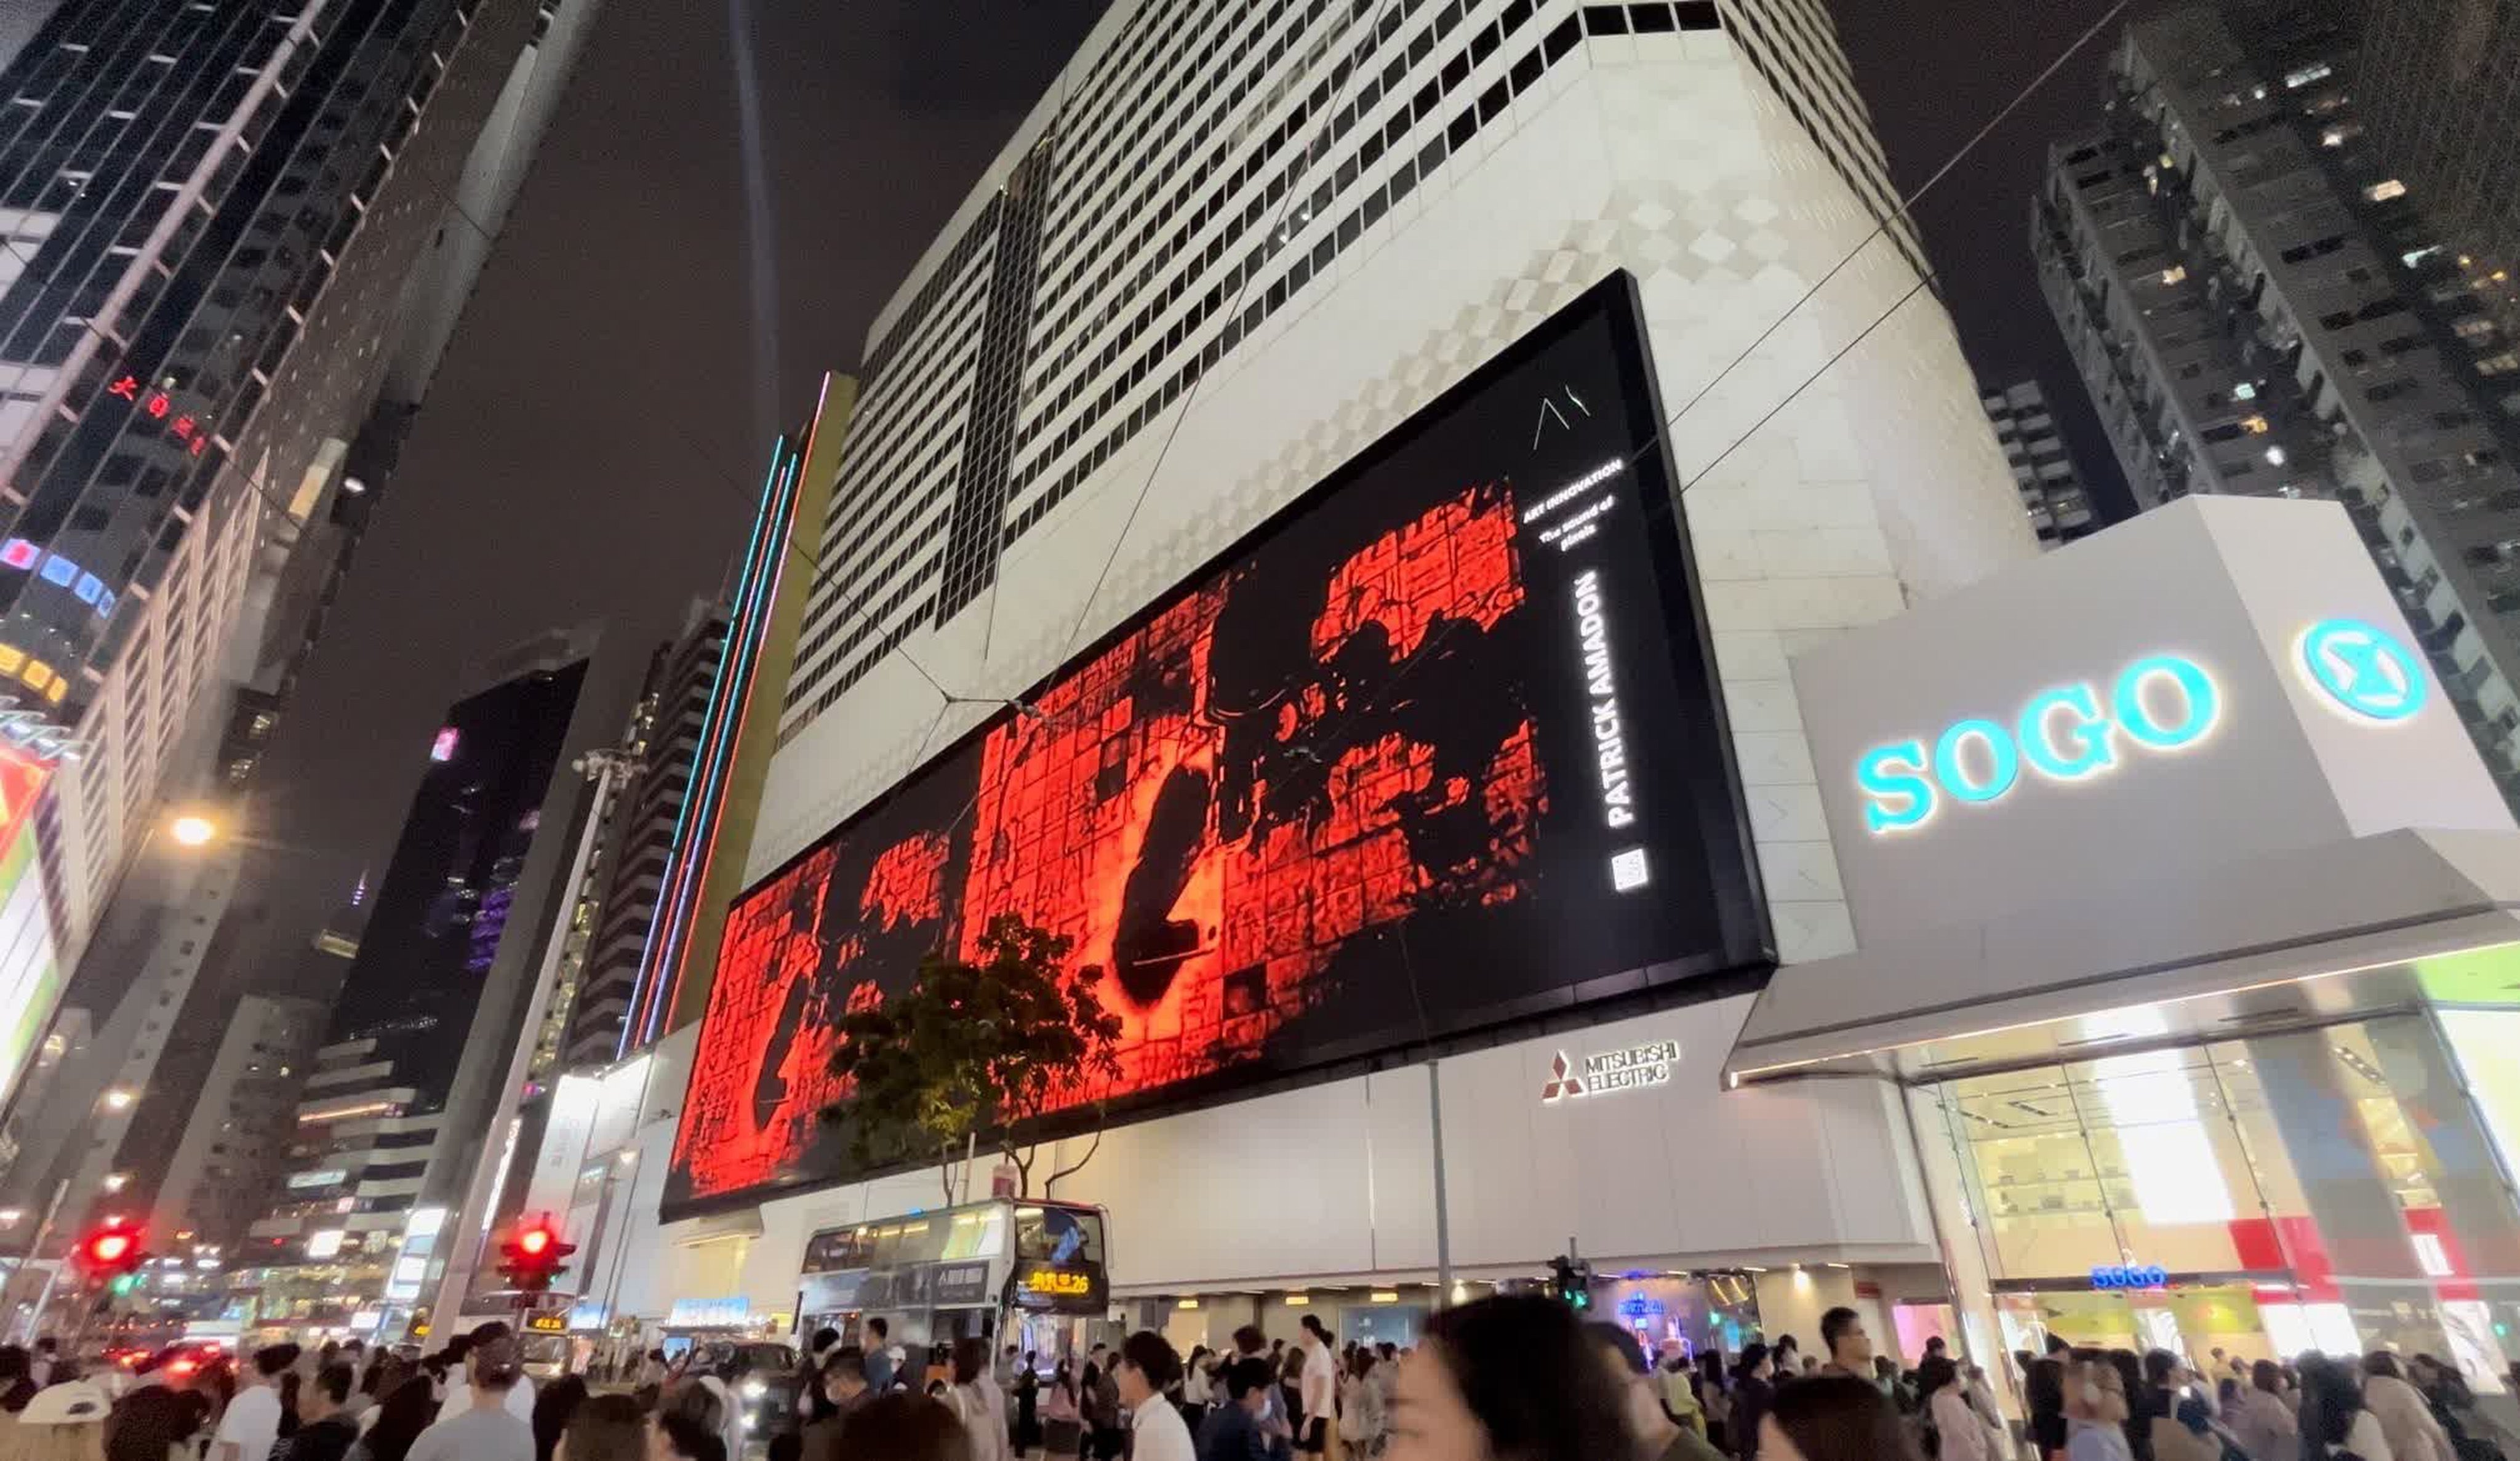 US artist Patrick Amadon on Thursday said that his artwork “No Rioters, 2023” was “taken down at the request of the government”. It was shown on the giant LED screen in Causeway Bay. Photo: Handout